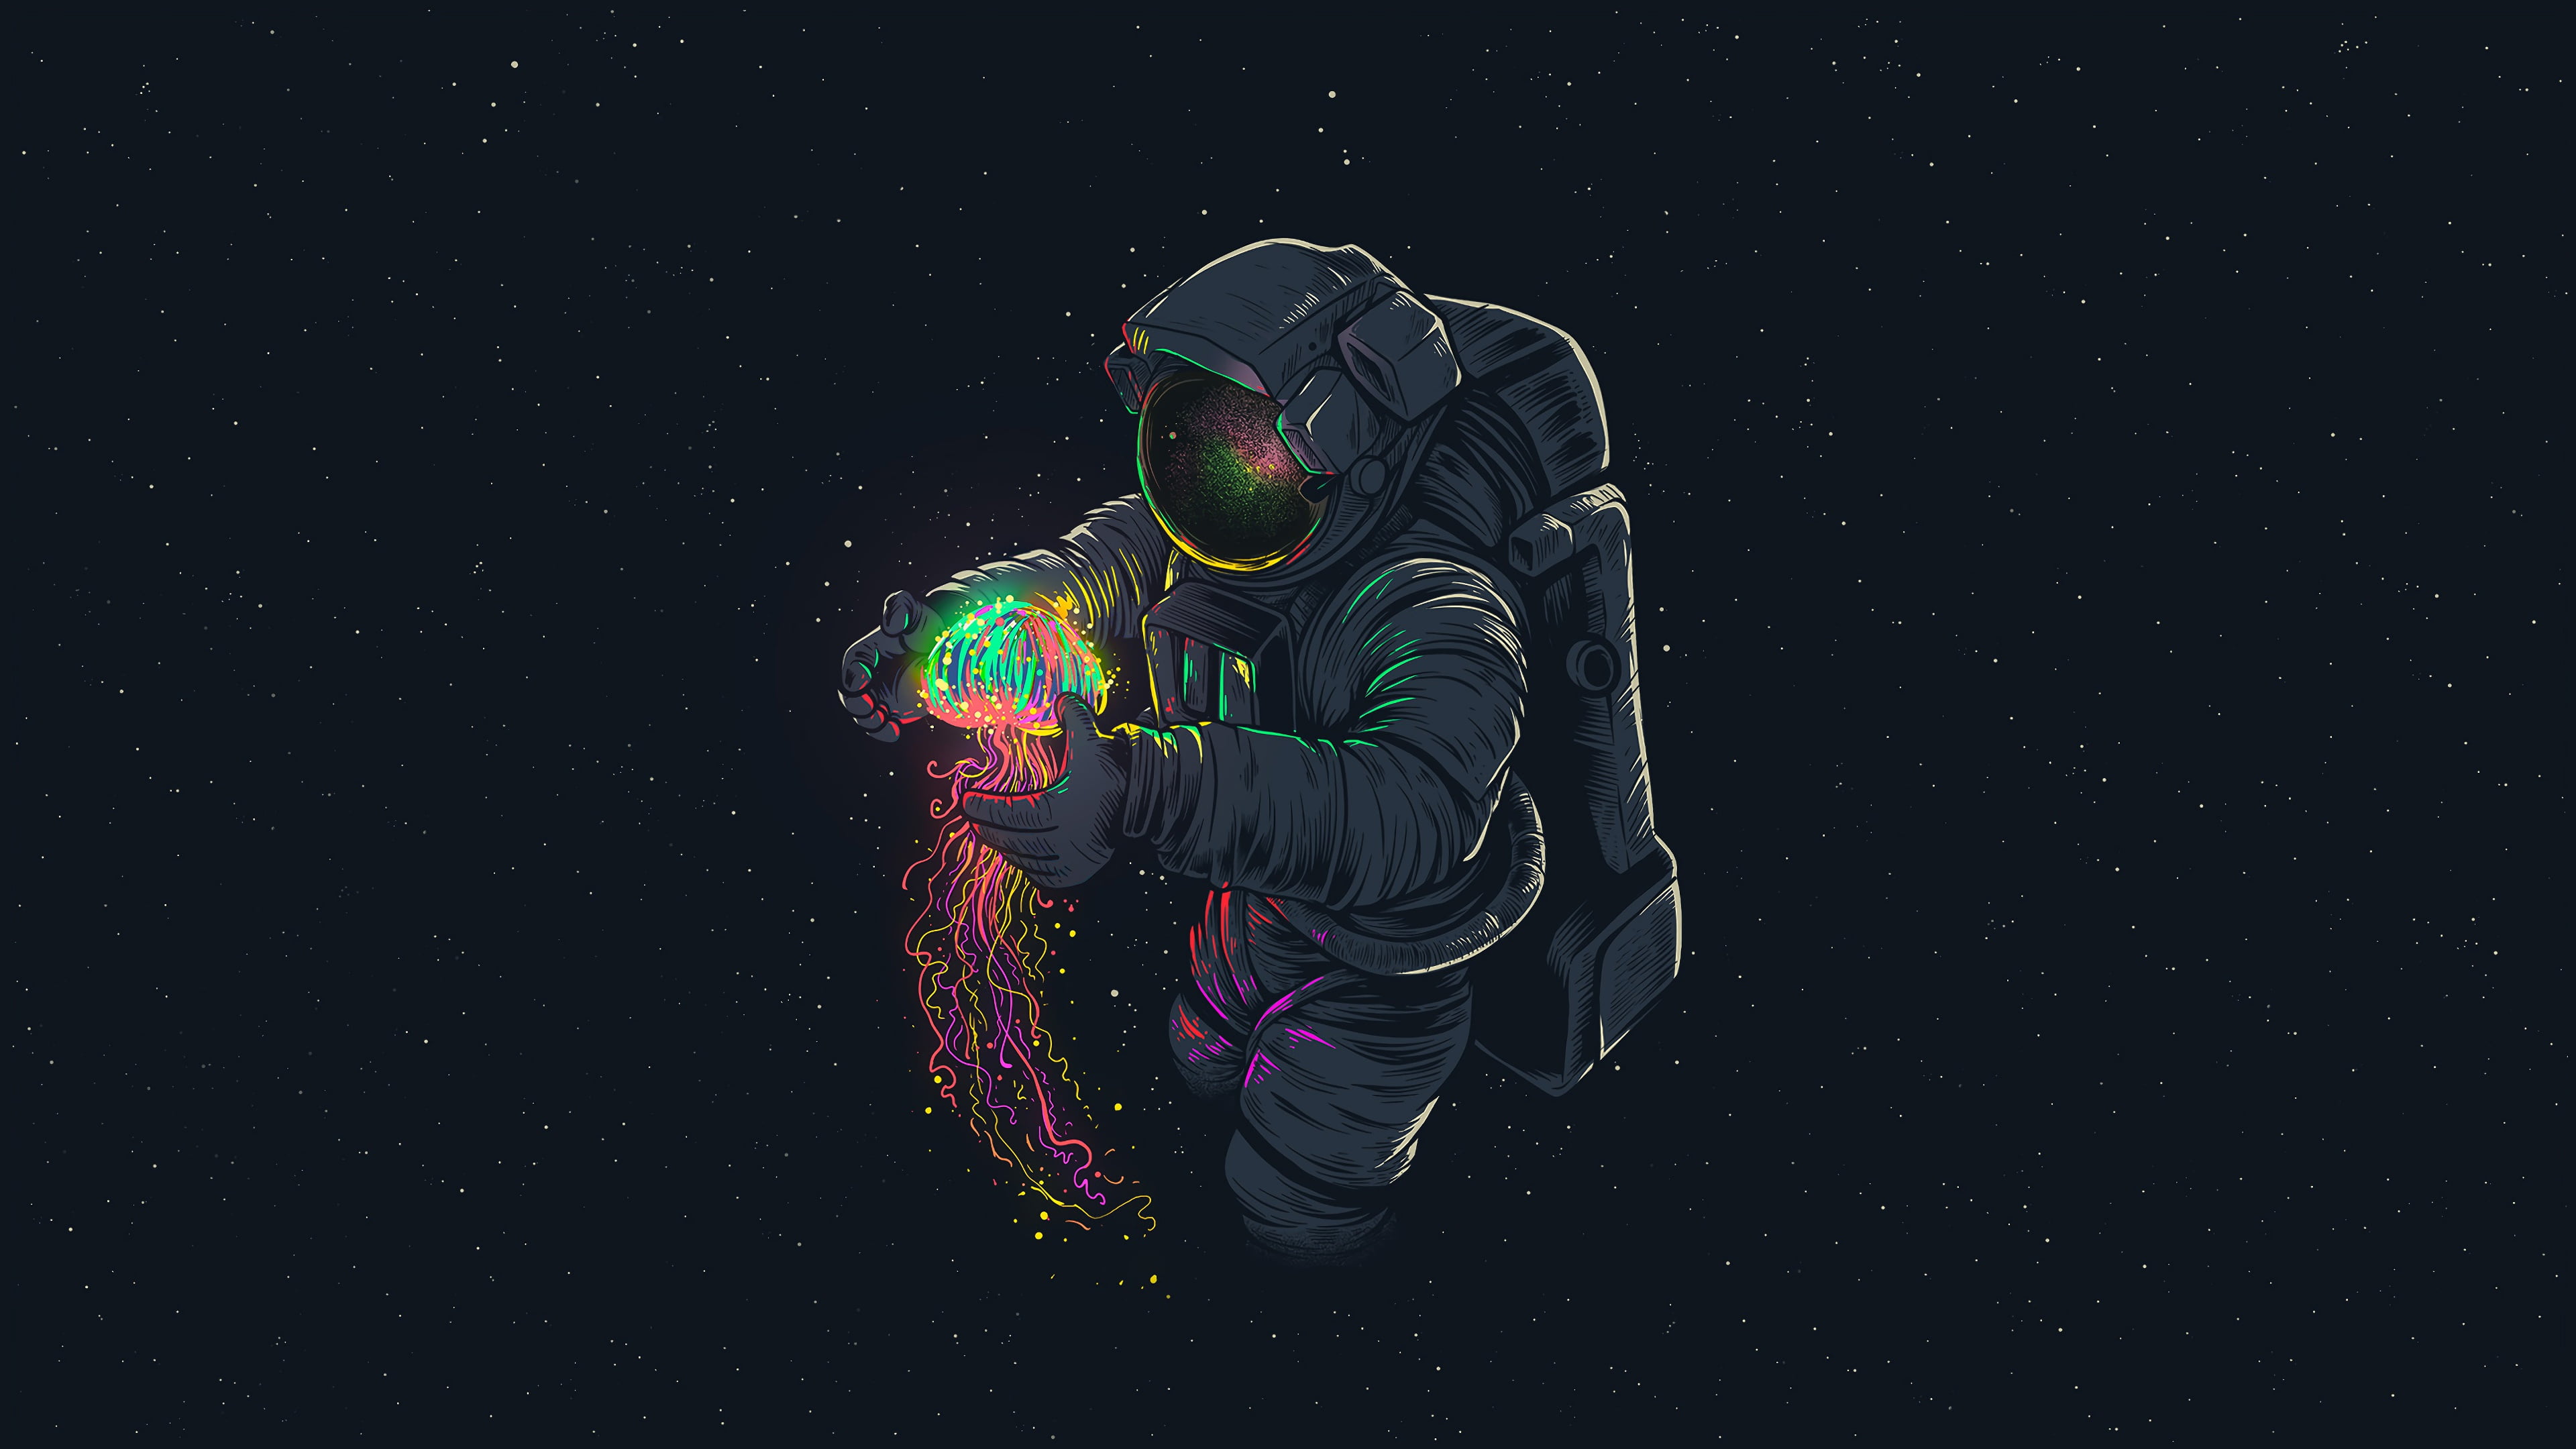 Easy to Draw Astronaut, black background, artwork, astronaut, space